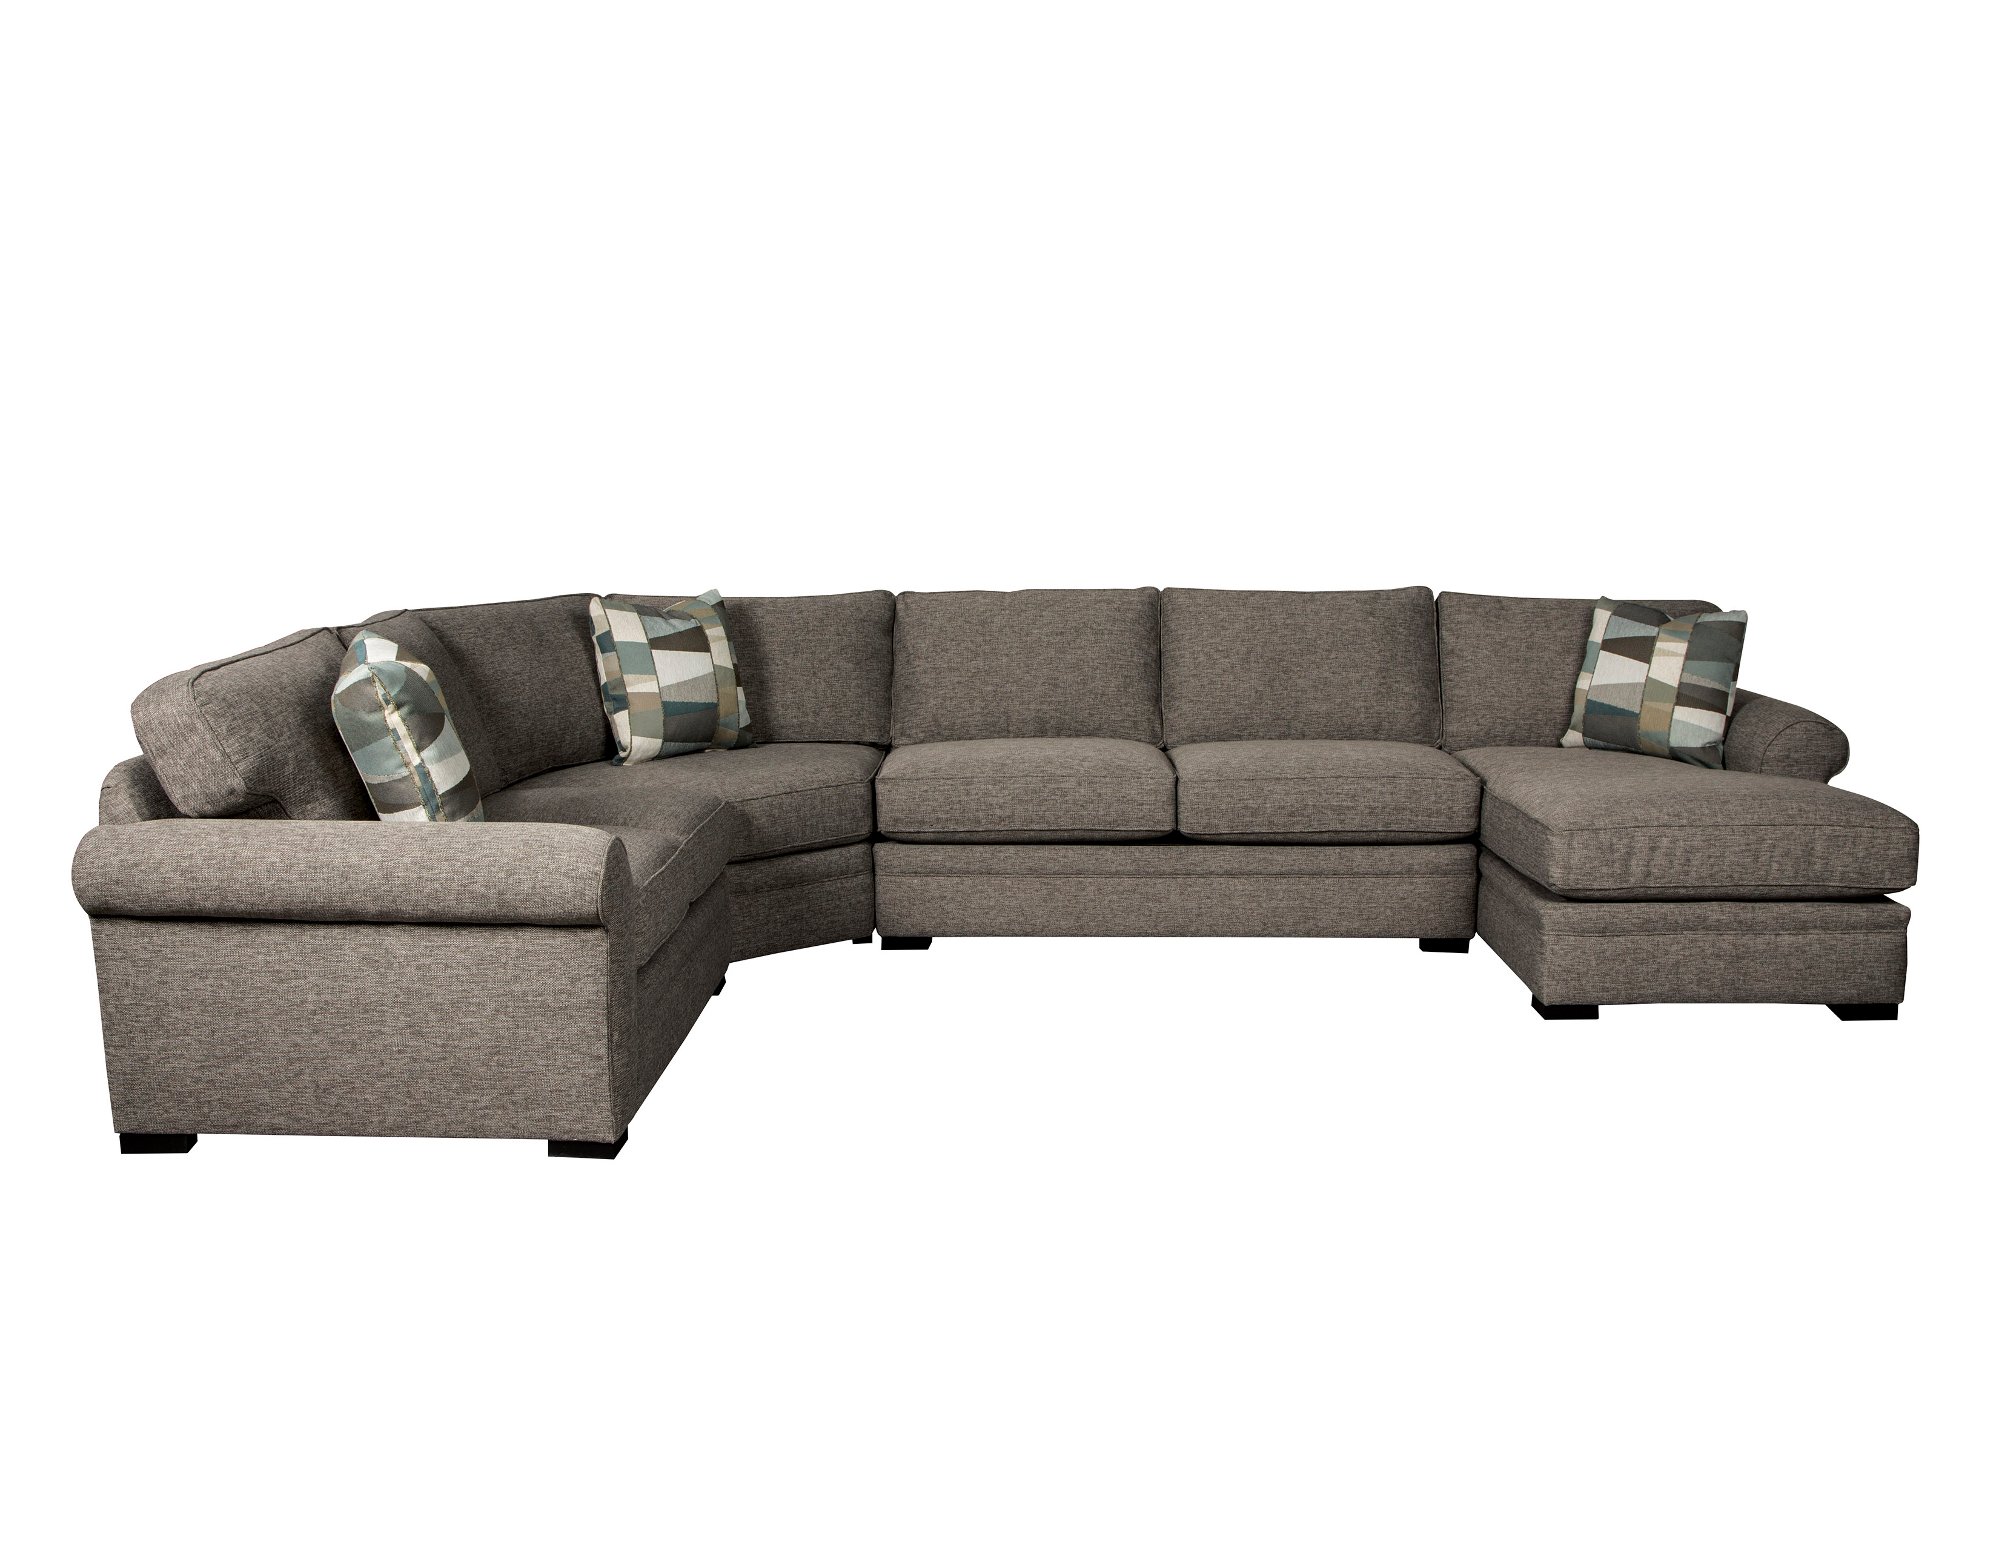 Brown 4 Piece Sectional Sofa With RAF Chaise Orion Rcwilley Image2 